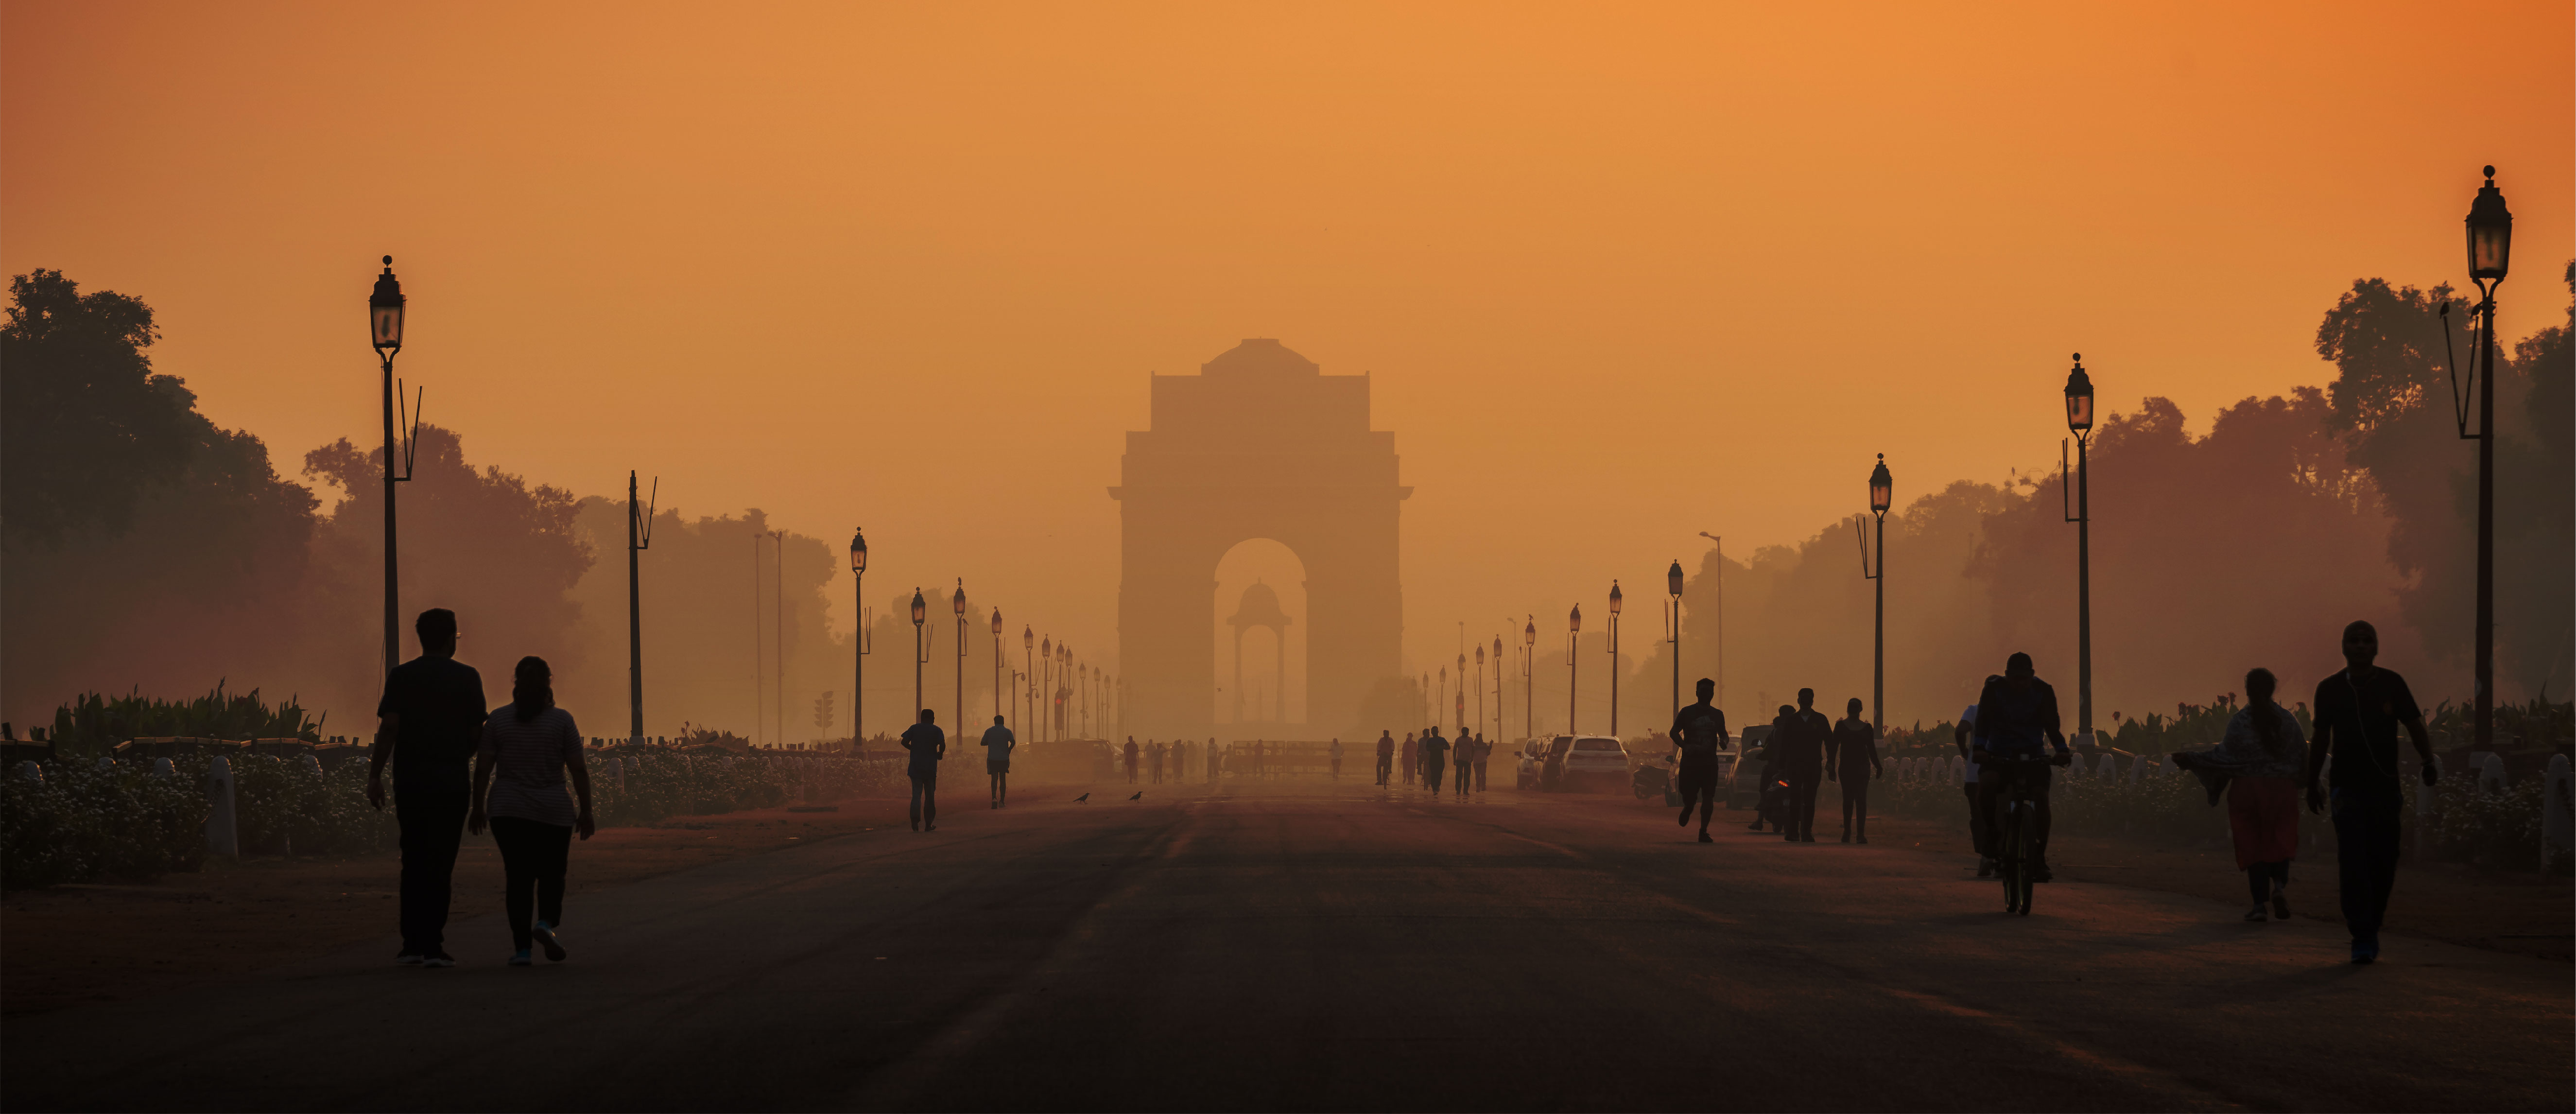 Analyzing pollution levels in Delhi NCR during the COVID-19 lockdown